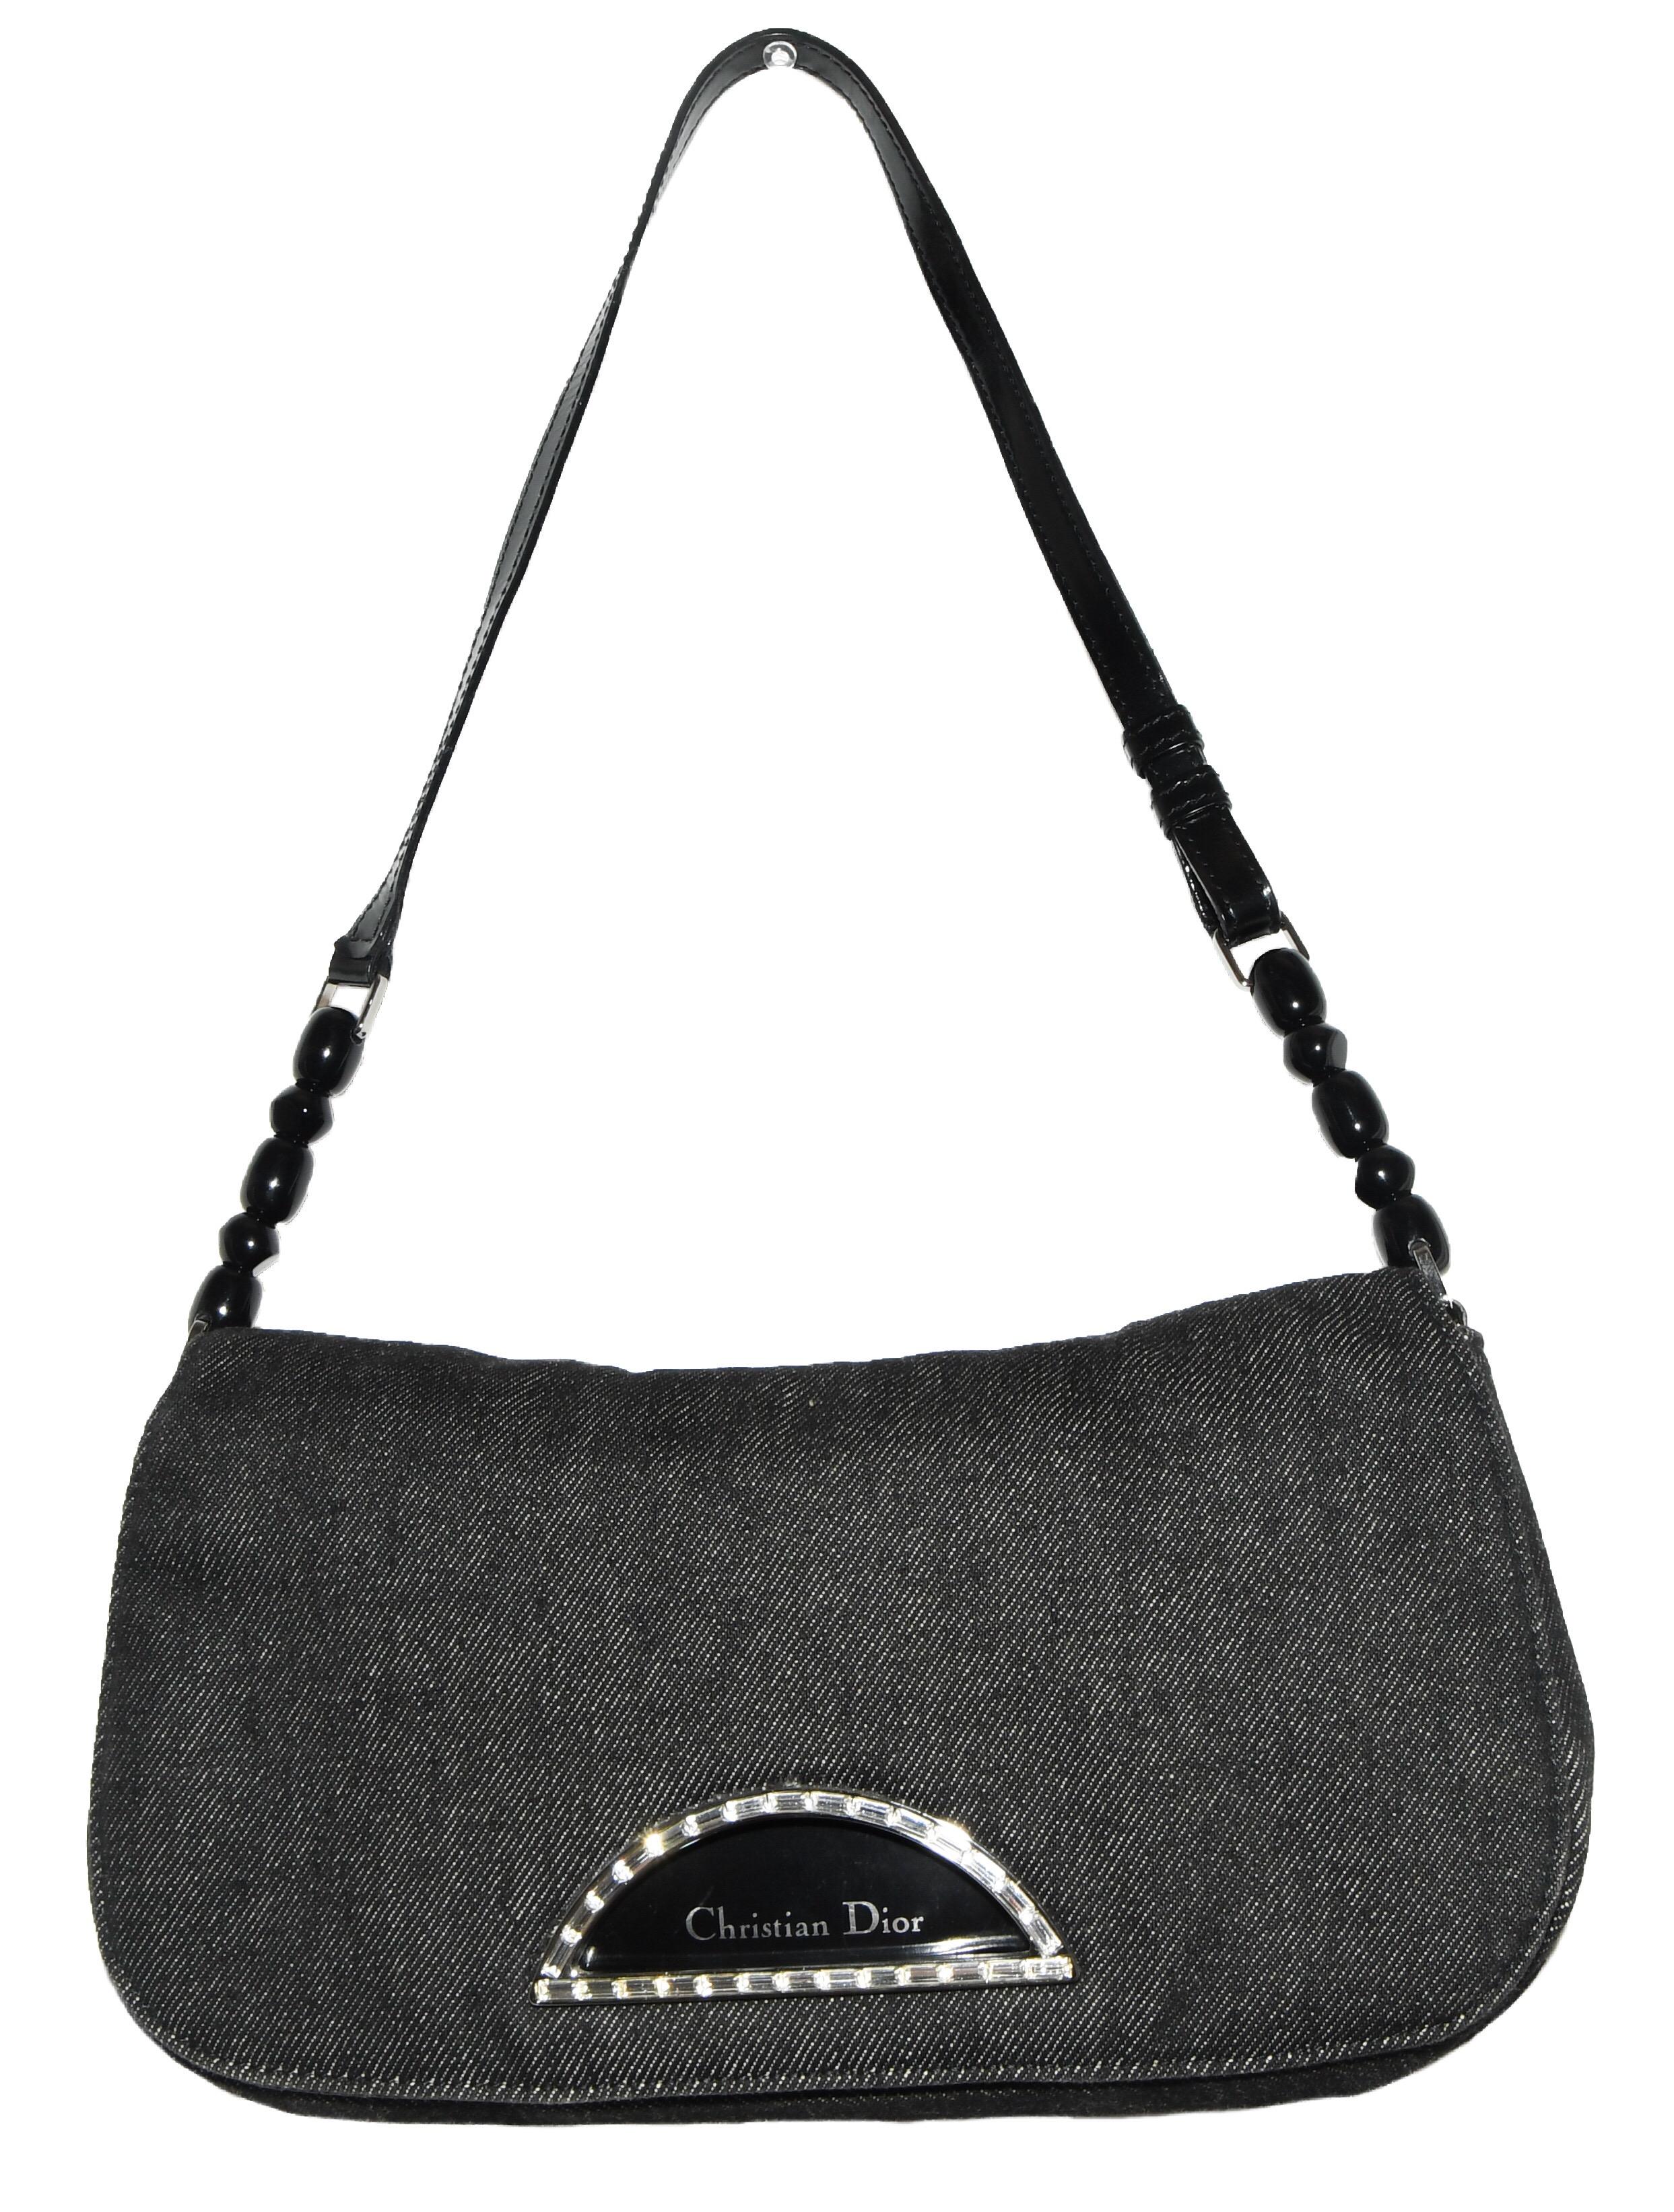 Christian Dior black denim Malice baguette contains silver tone hardware.  This bag includes a black flat leather strap with black  decorative beads.  This front flap bag with magnetic closure under flap and peek a boo opening that is adorned with